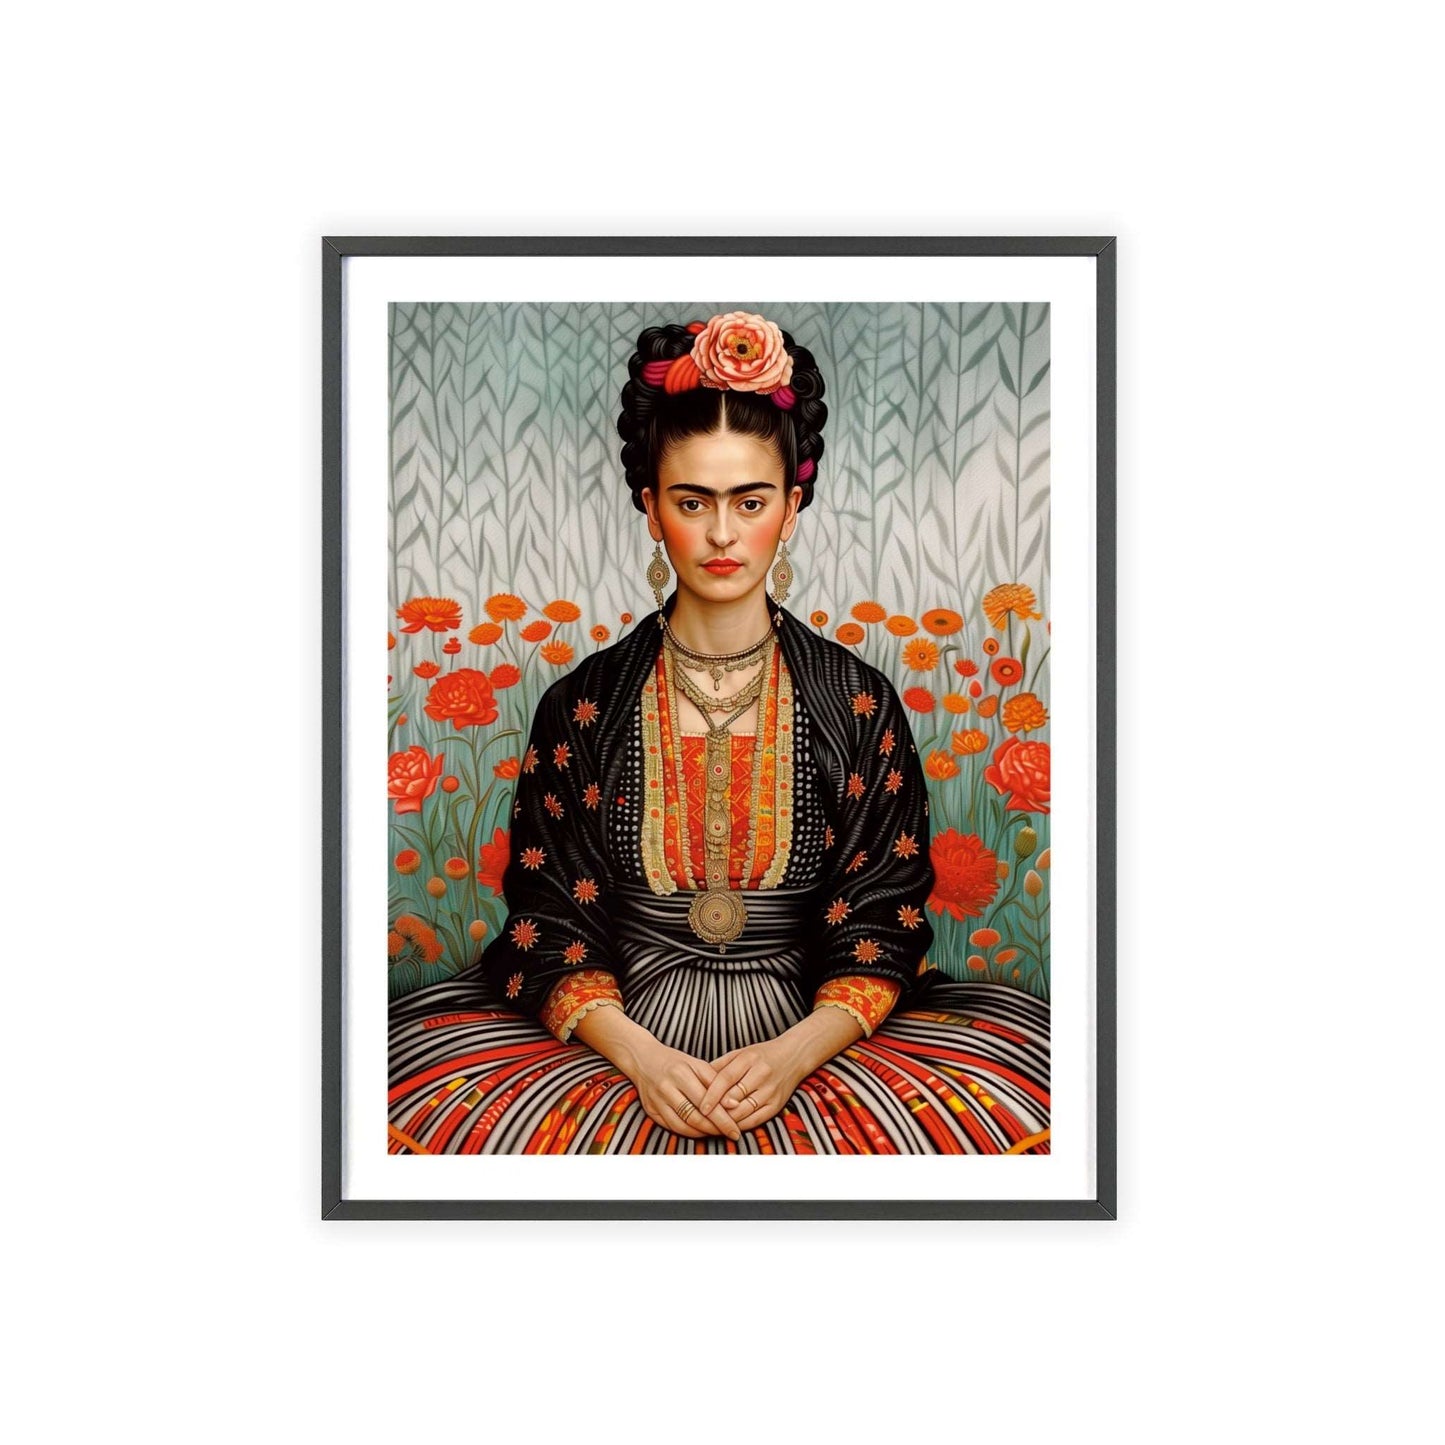 Minimalist poster featuring Frida Kahlo sitting in a field of flowers.  The poster is black and white, with a focus on Frida's powerful gaze and unibrow.  The poster is framed.